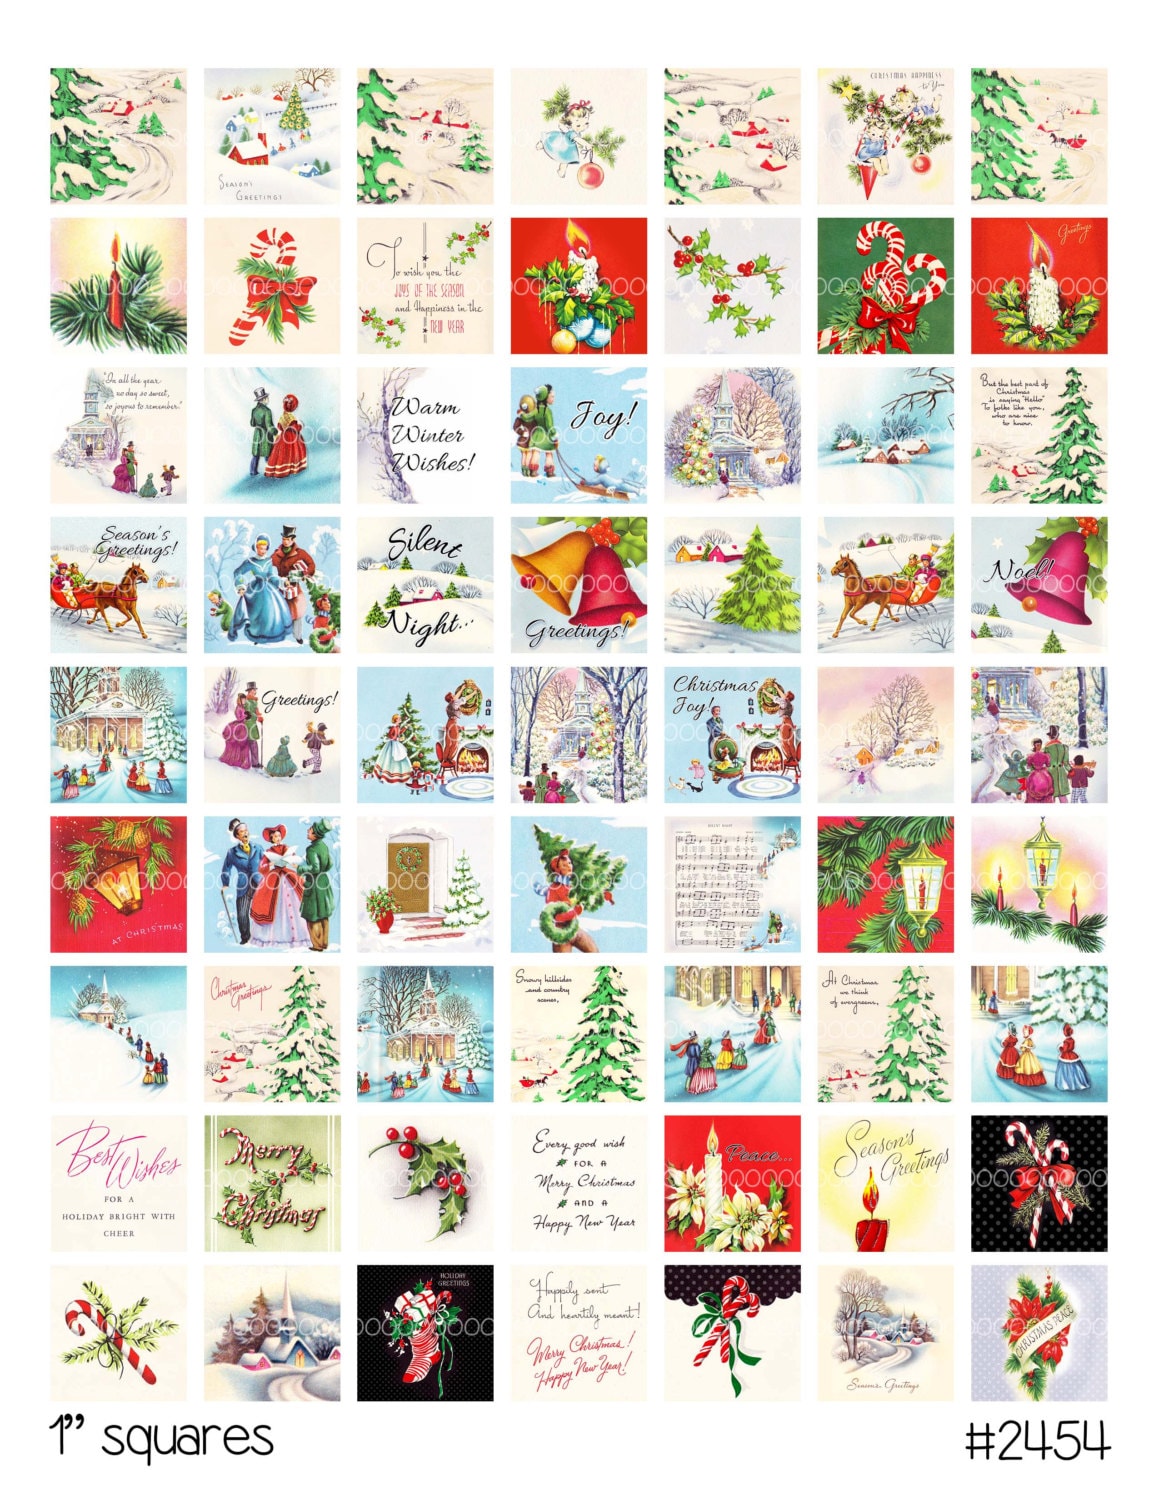 Holly--8.5 by 11--Digital Collage Sheet 4170 Vintage People instant download Digital Clipart Snow Vintage Christmas Cards tags--Candles